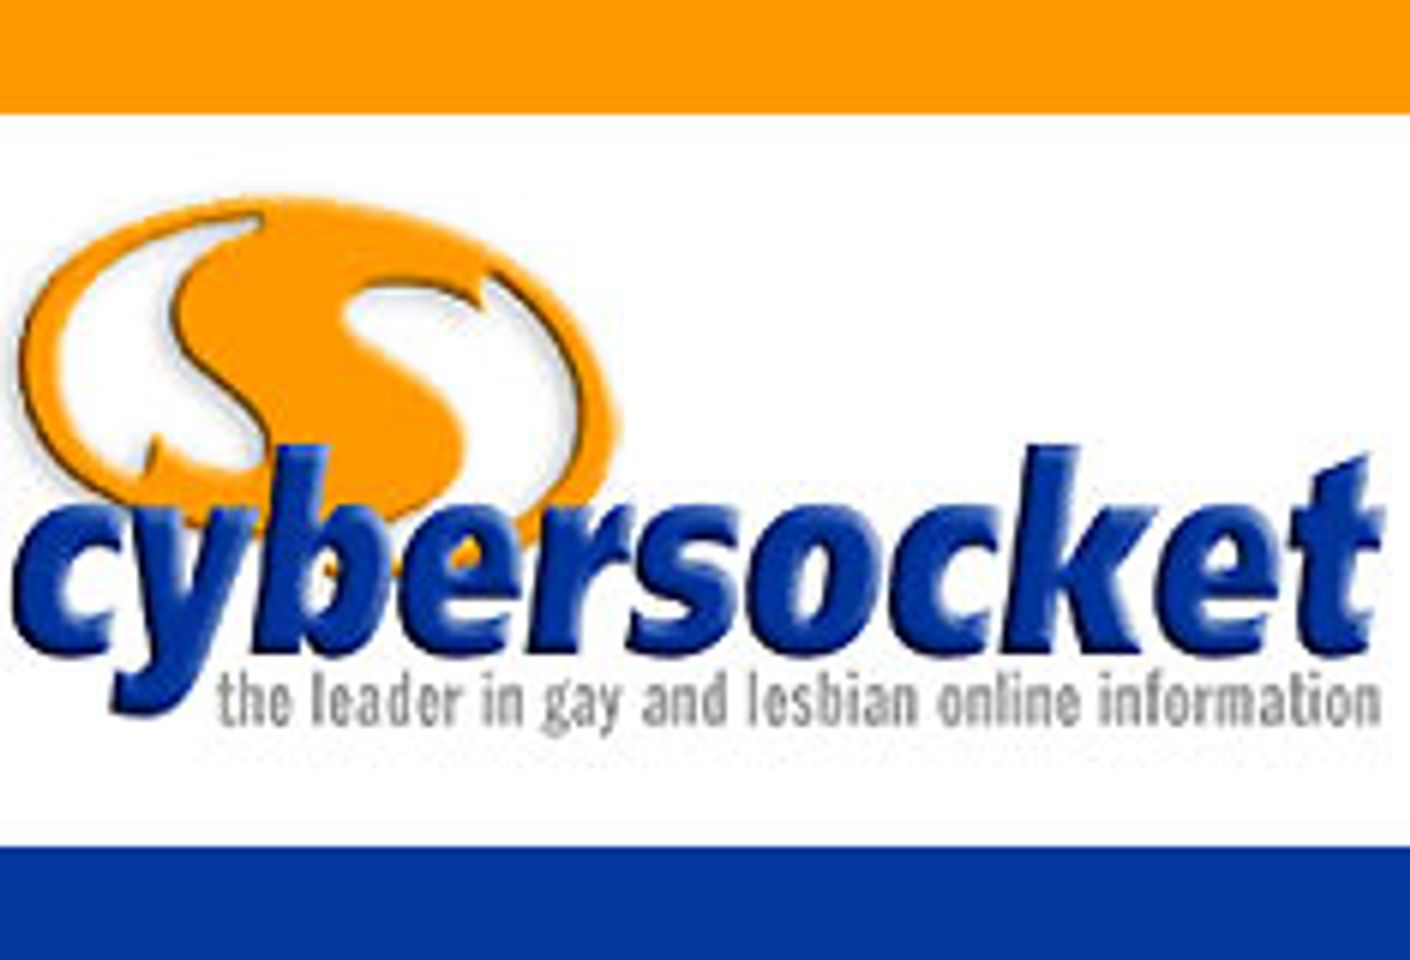 Cybersocket Sponsoring Exclusive Party at XL Lounge